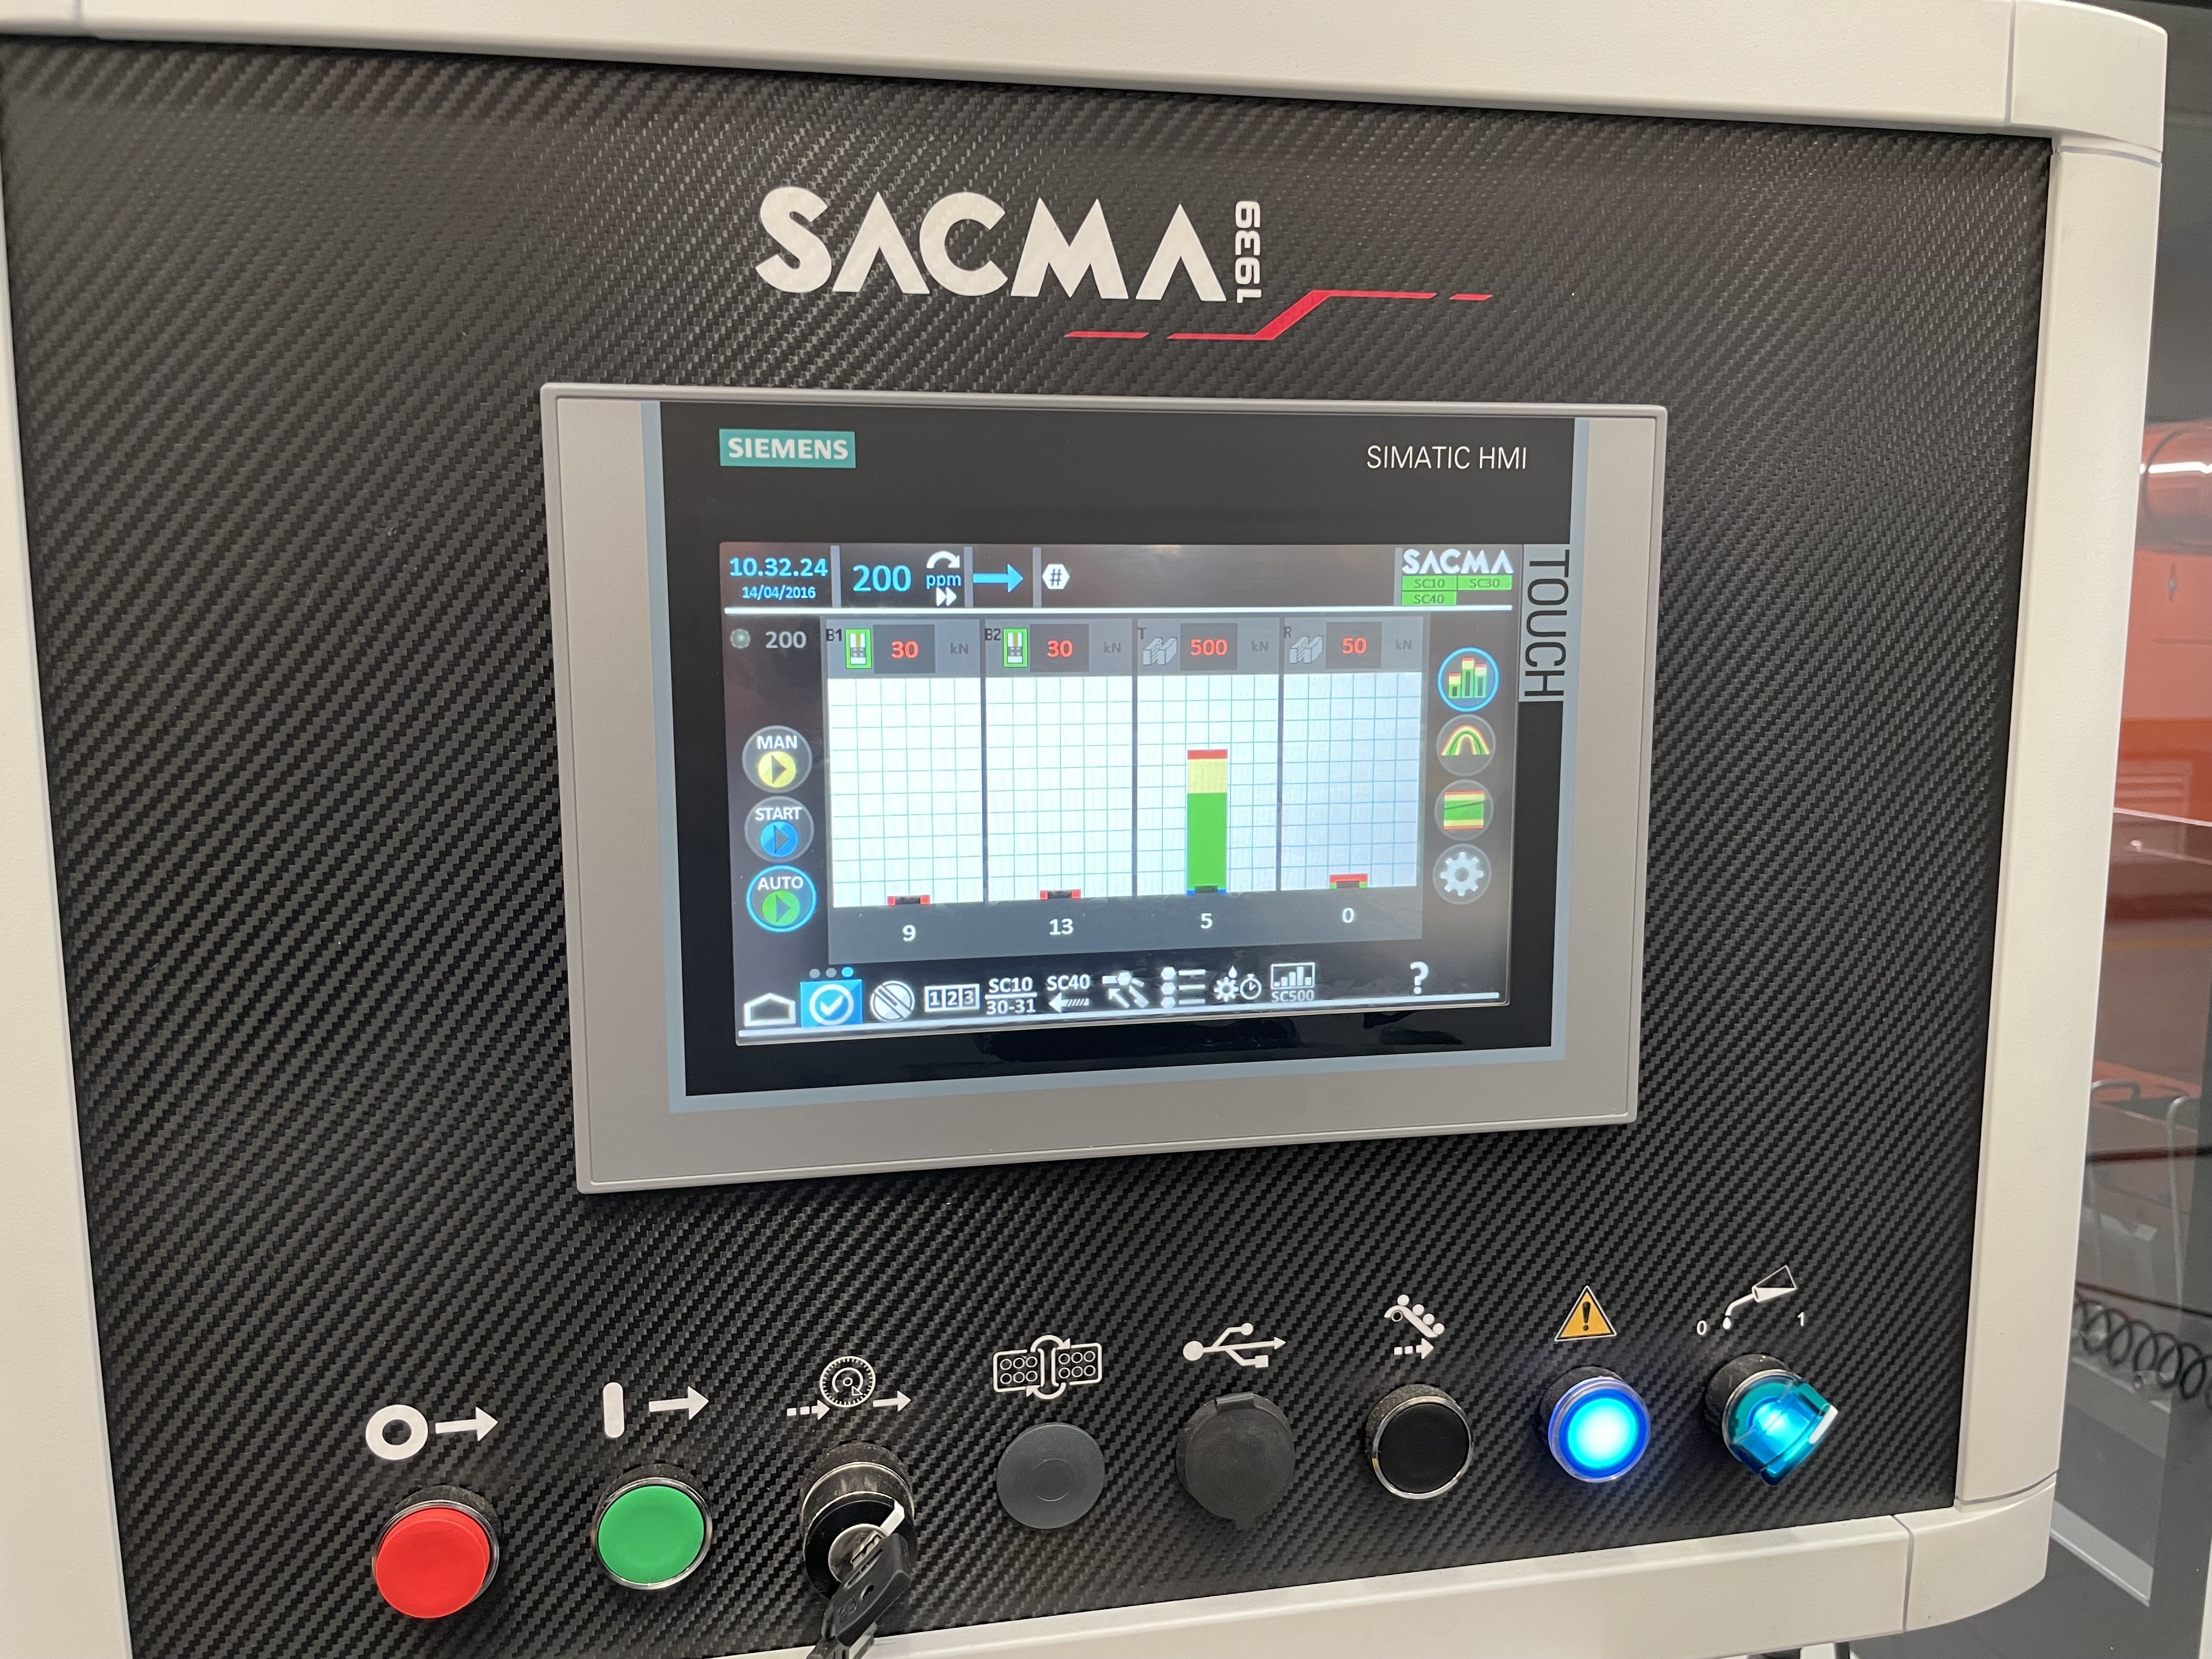 monitoring system, Sacma, multi station, cold forging machines, machine, onitoring systems, systems, control system, CRM, progressive machines, combined machines, monitor, sensors